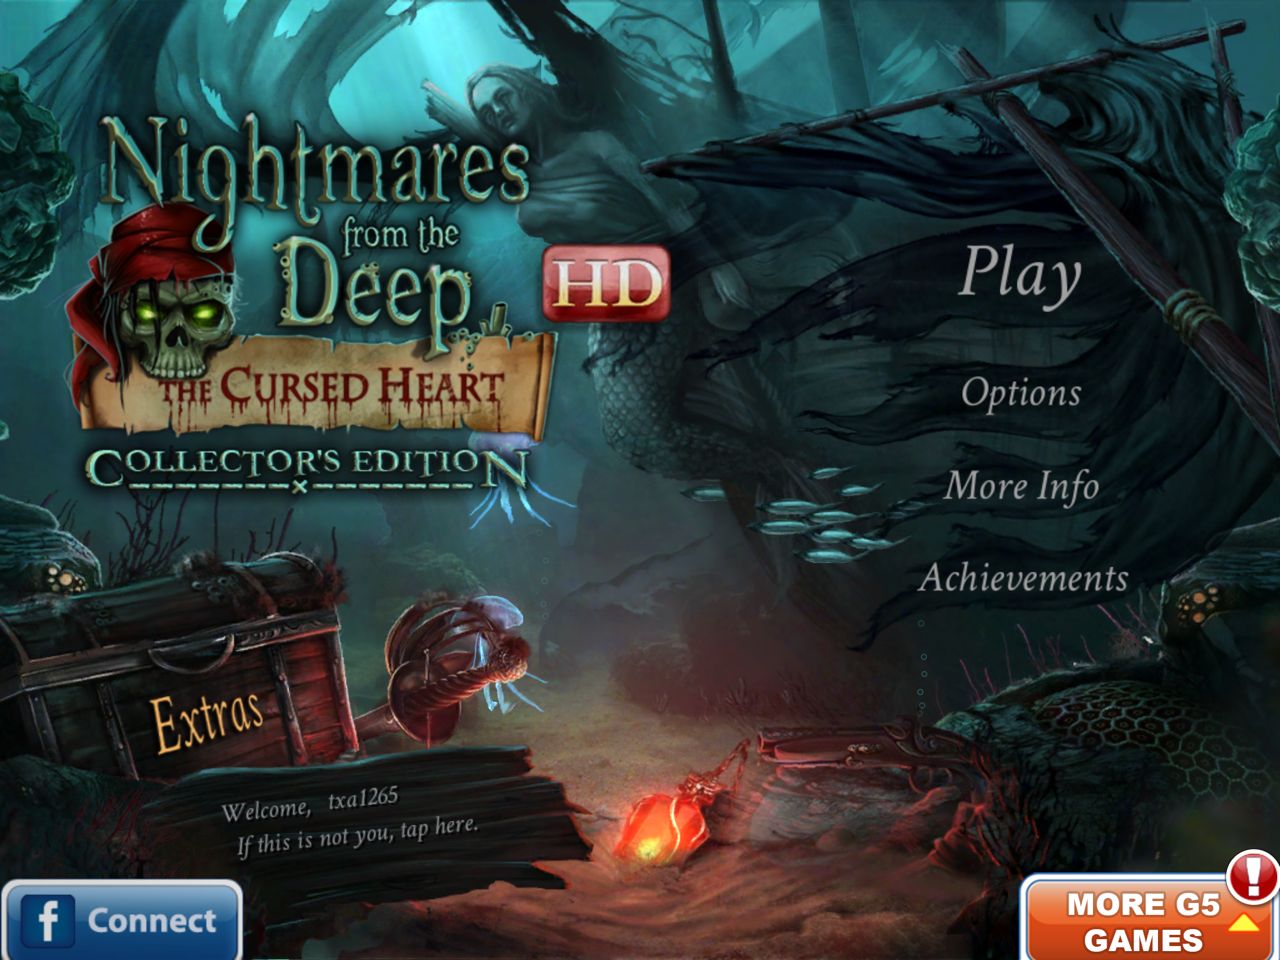 Nightmares from the Deep the Cursed Heart, Collector's Edition HD for iPad Review